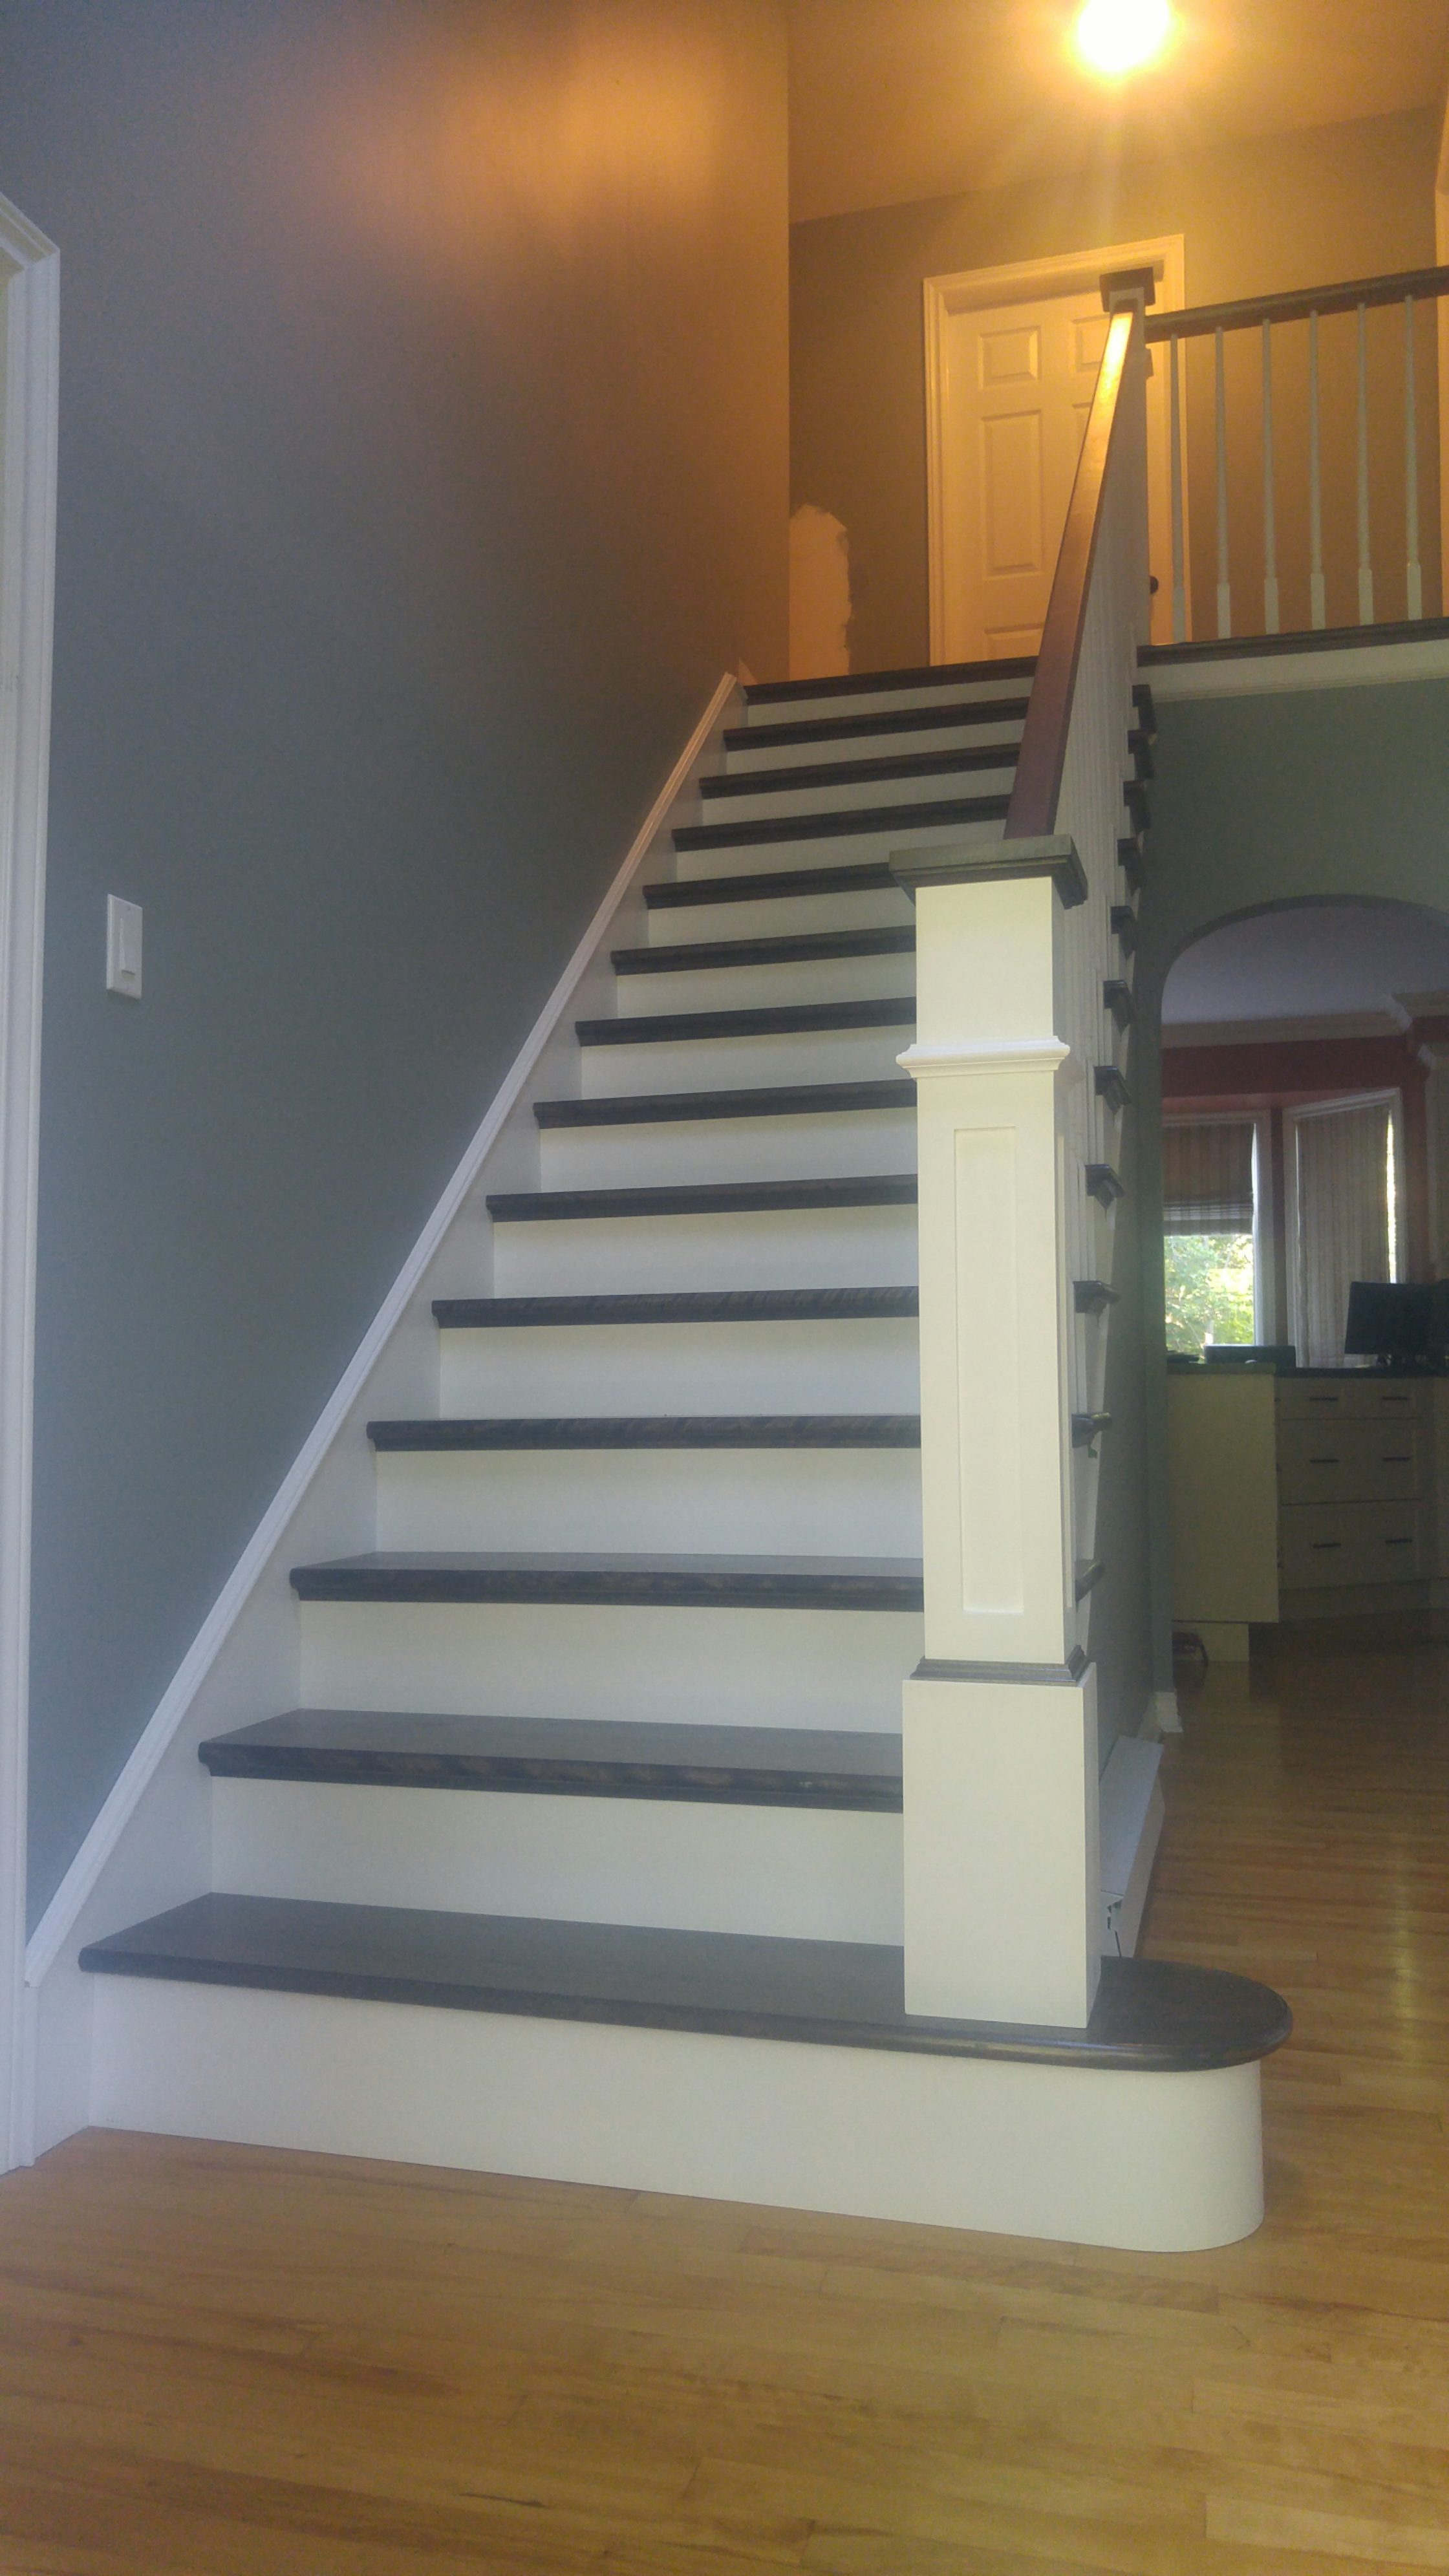 Breathing life into an older staircase